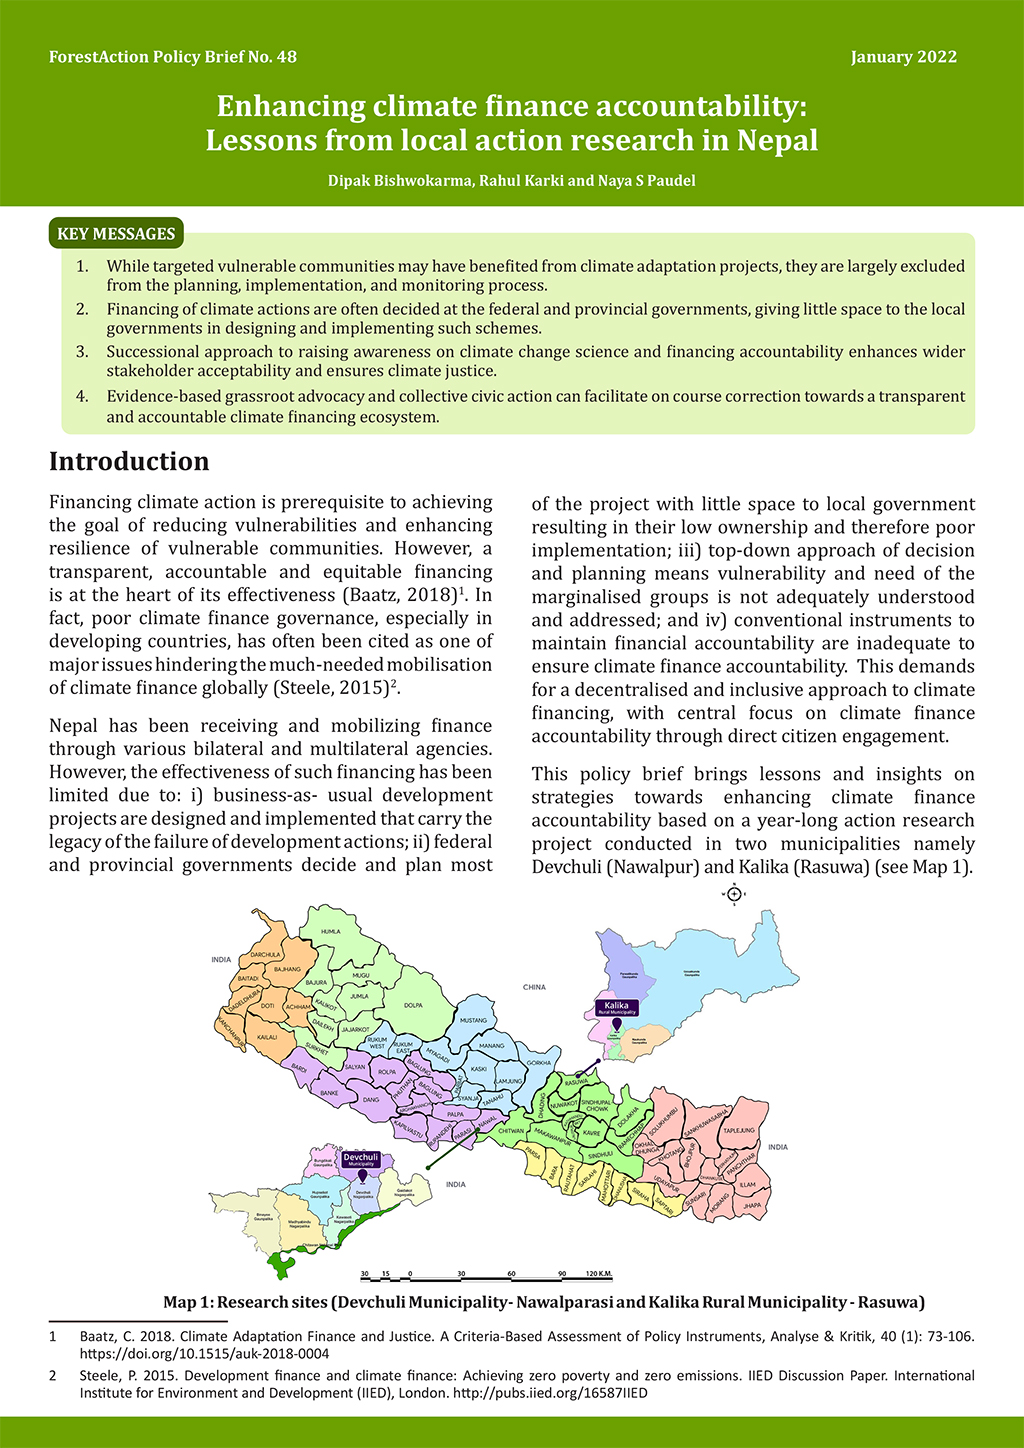 Enhancing climate finance accountability: Lessons from local action research in Nepal